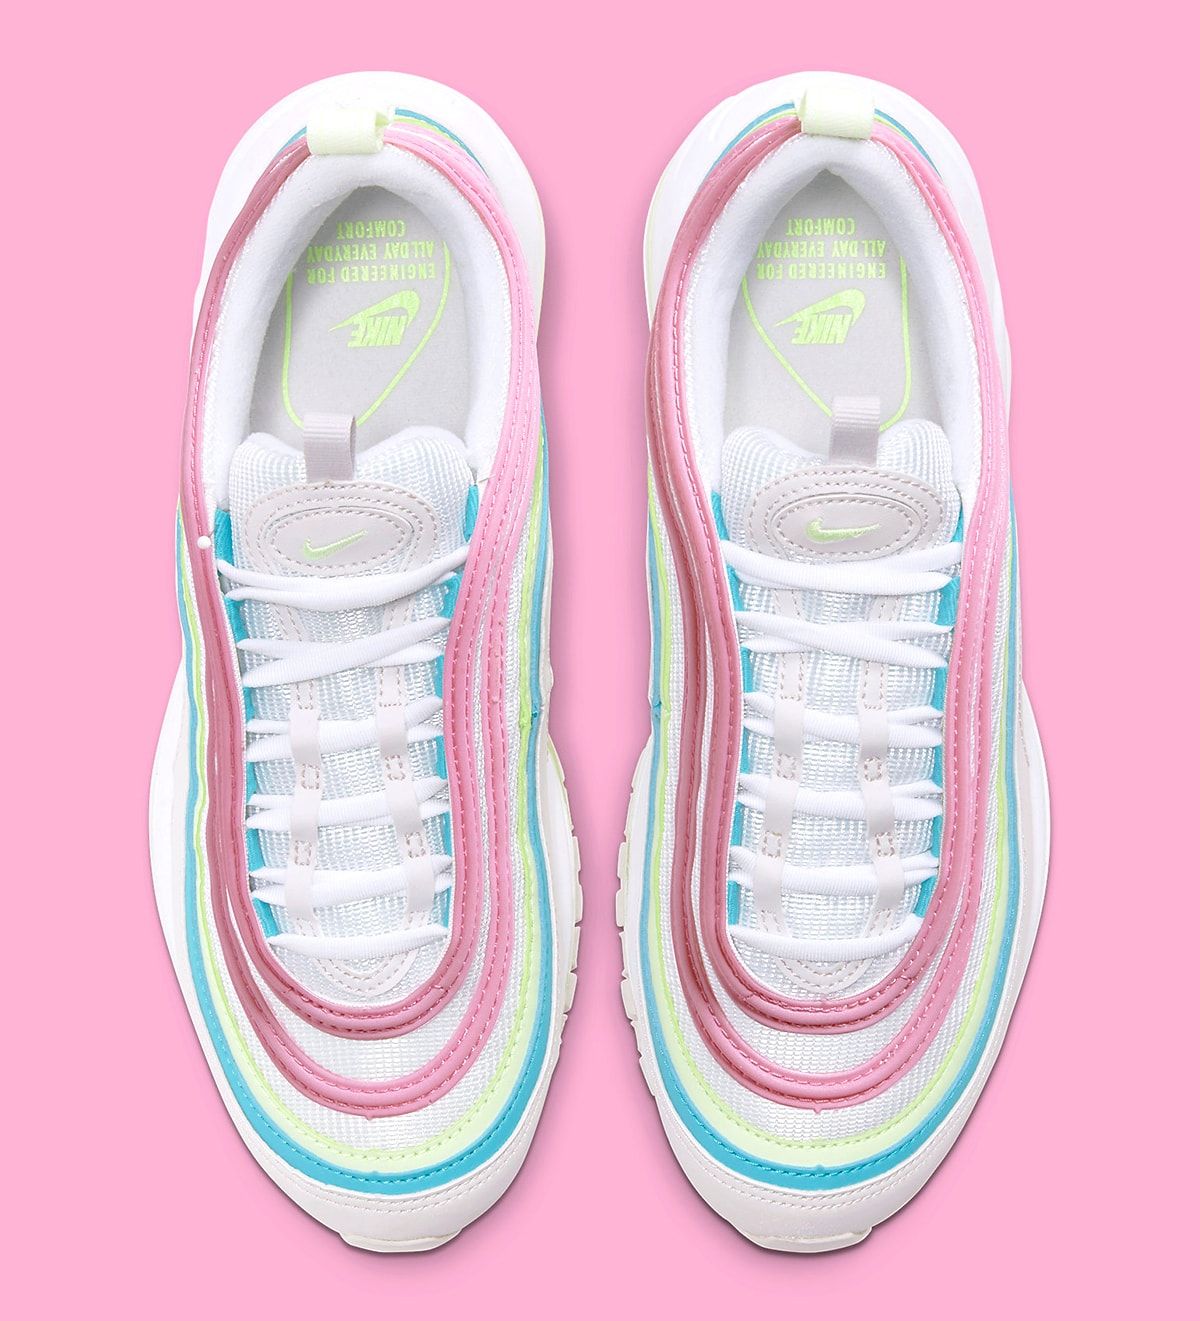 nike air max 97 easter sunday